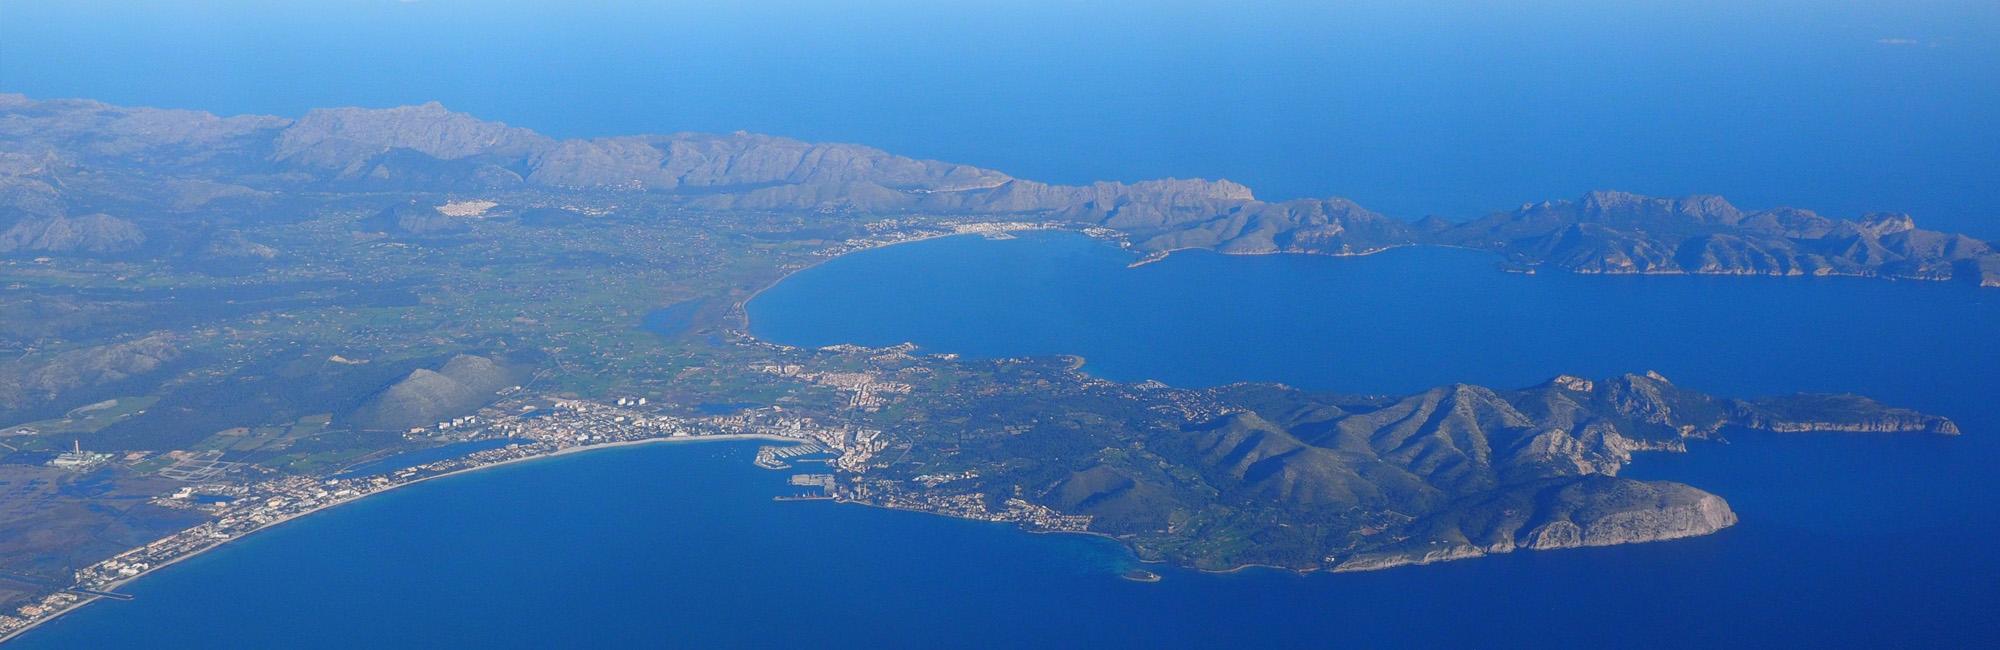 Mallorca view from the plain